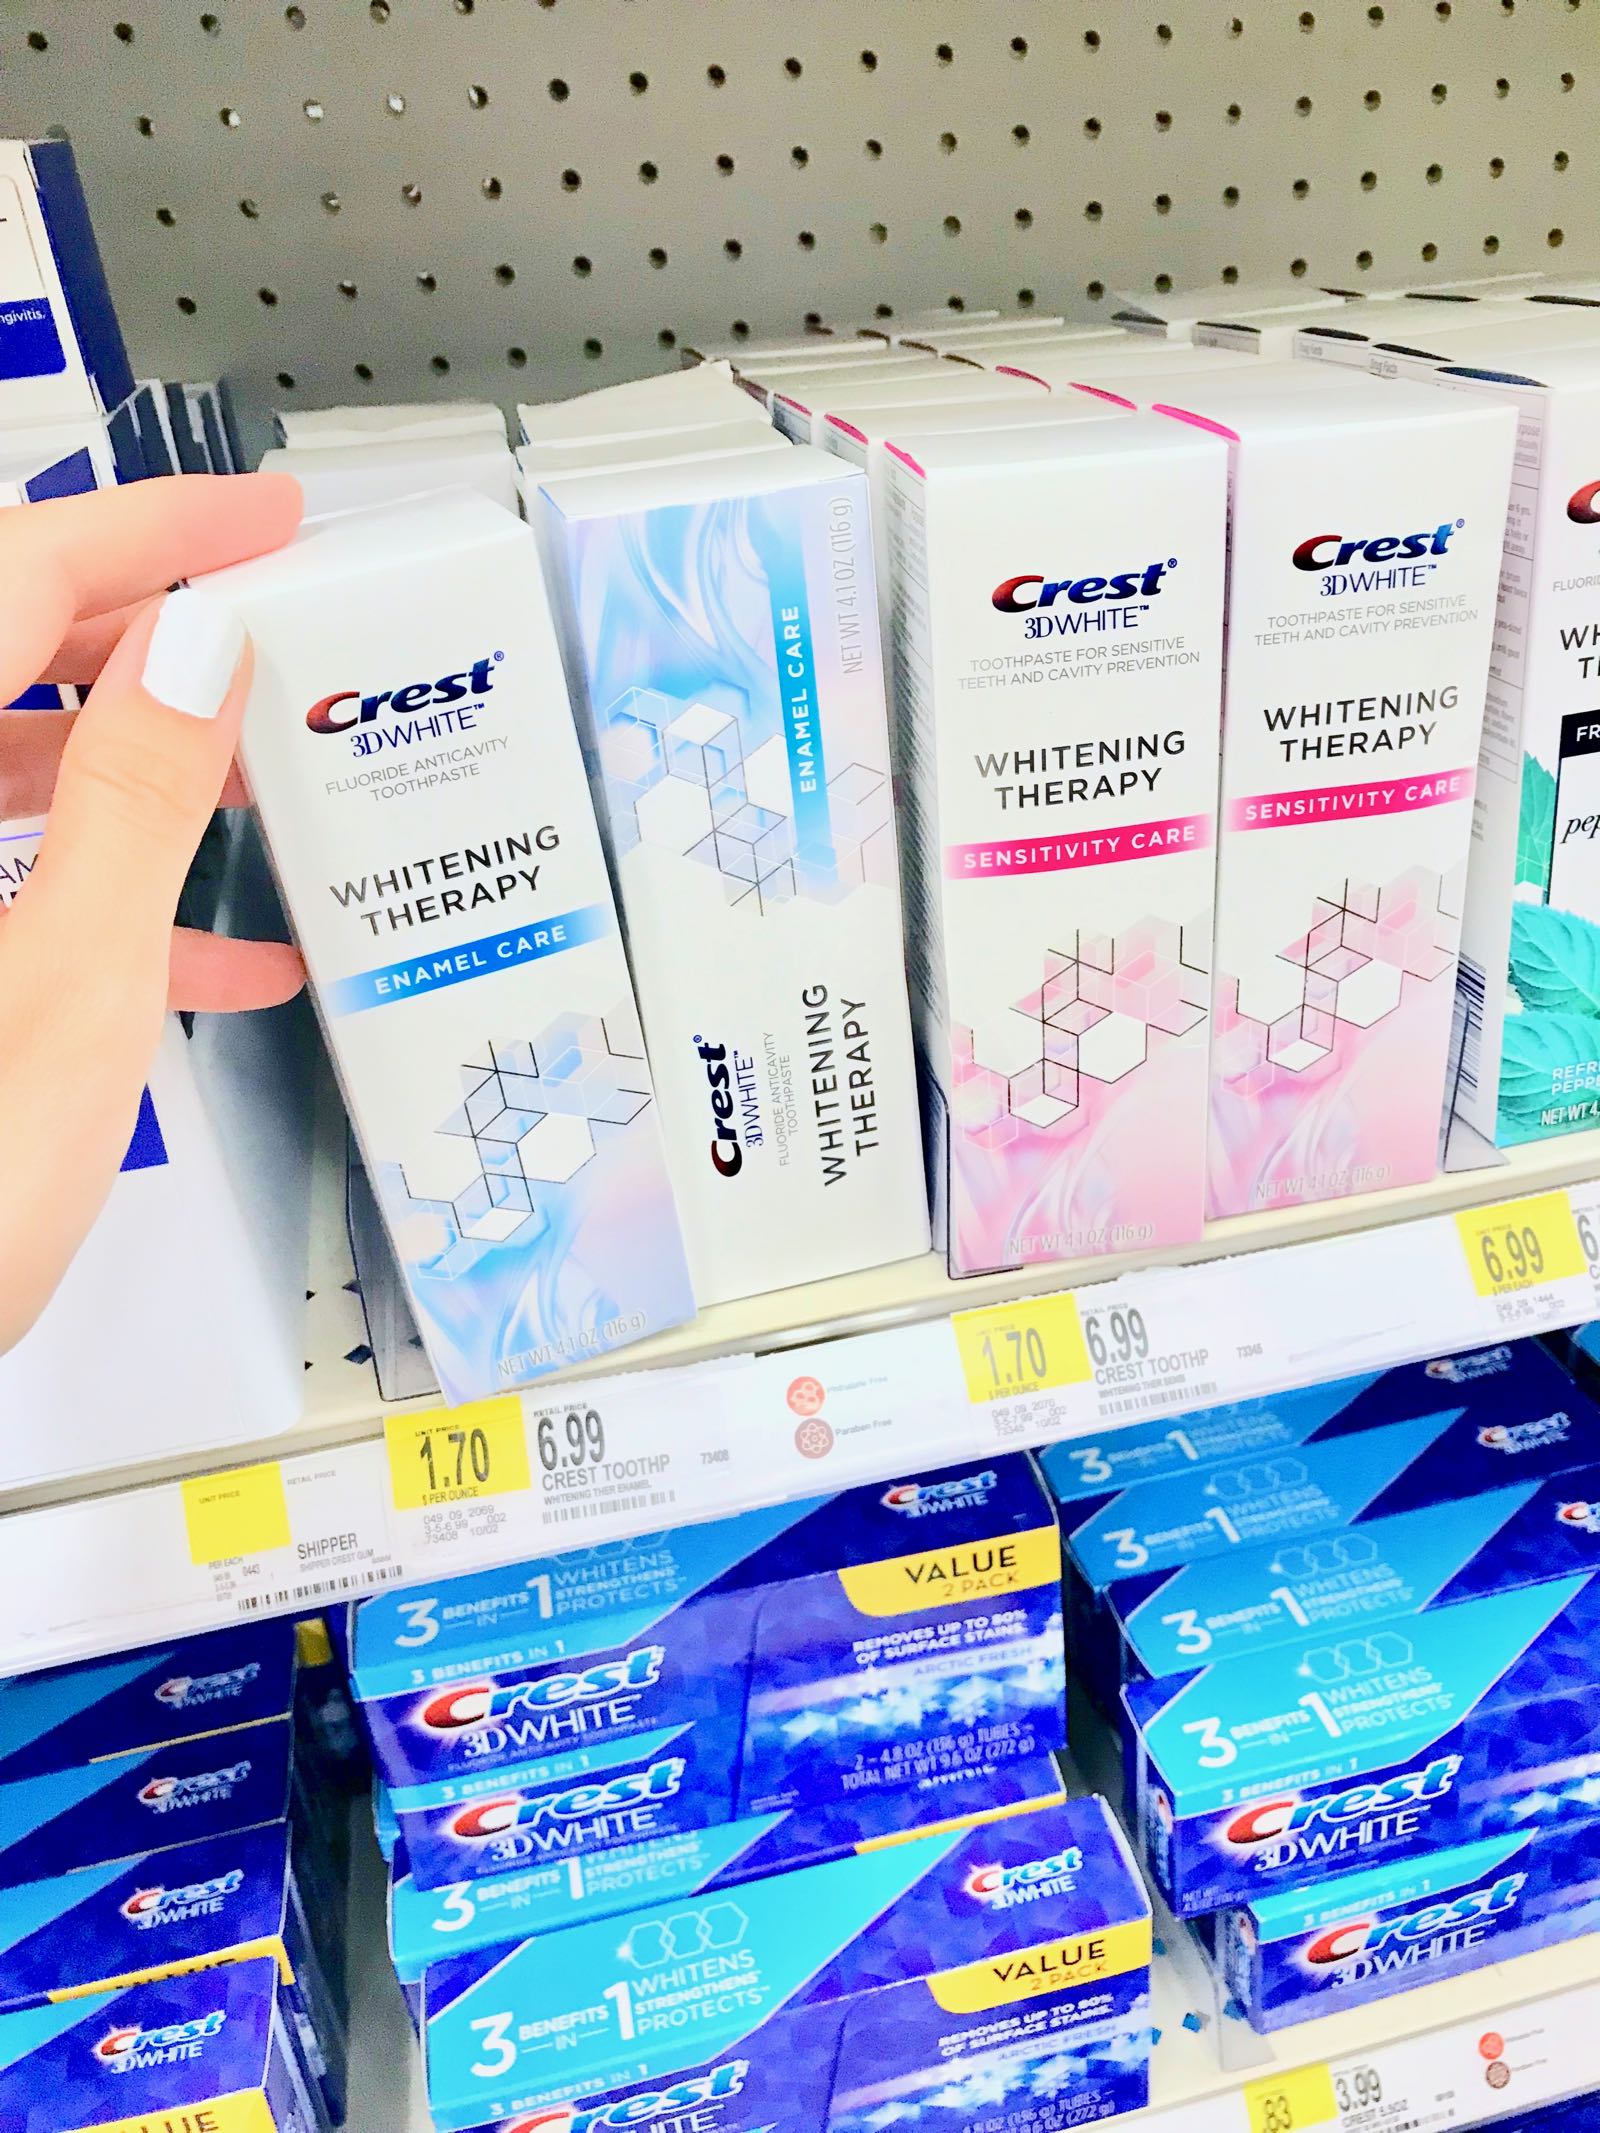 Save $2 on Crest Toothpaste at Target - click here to get the deal!